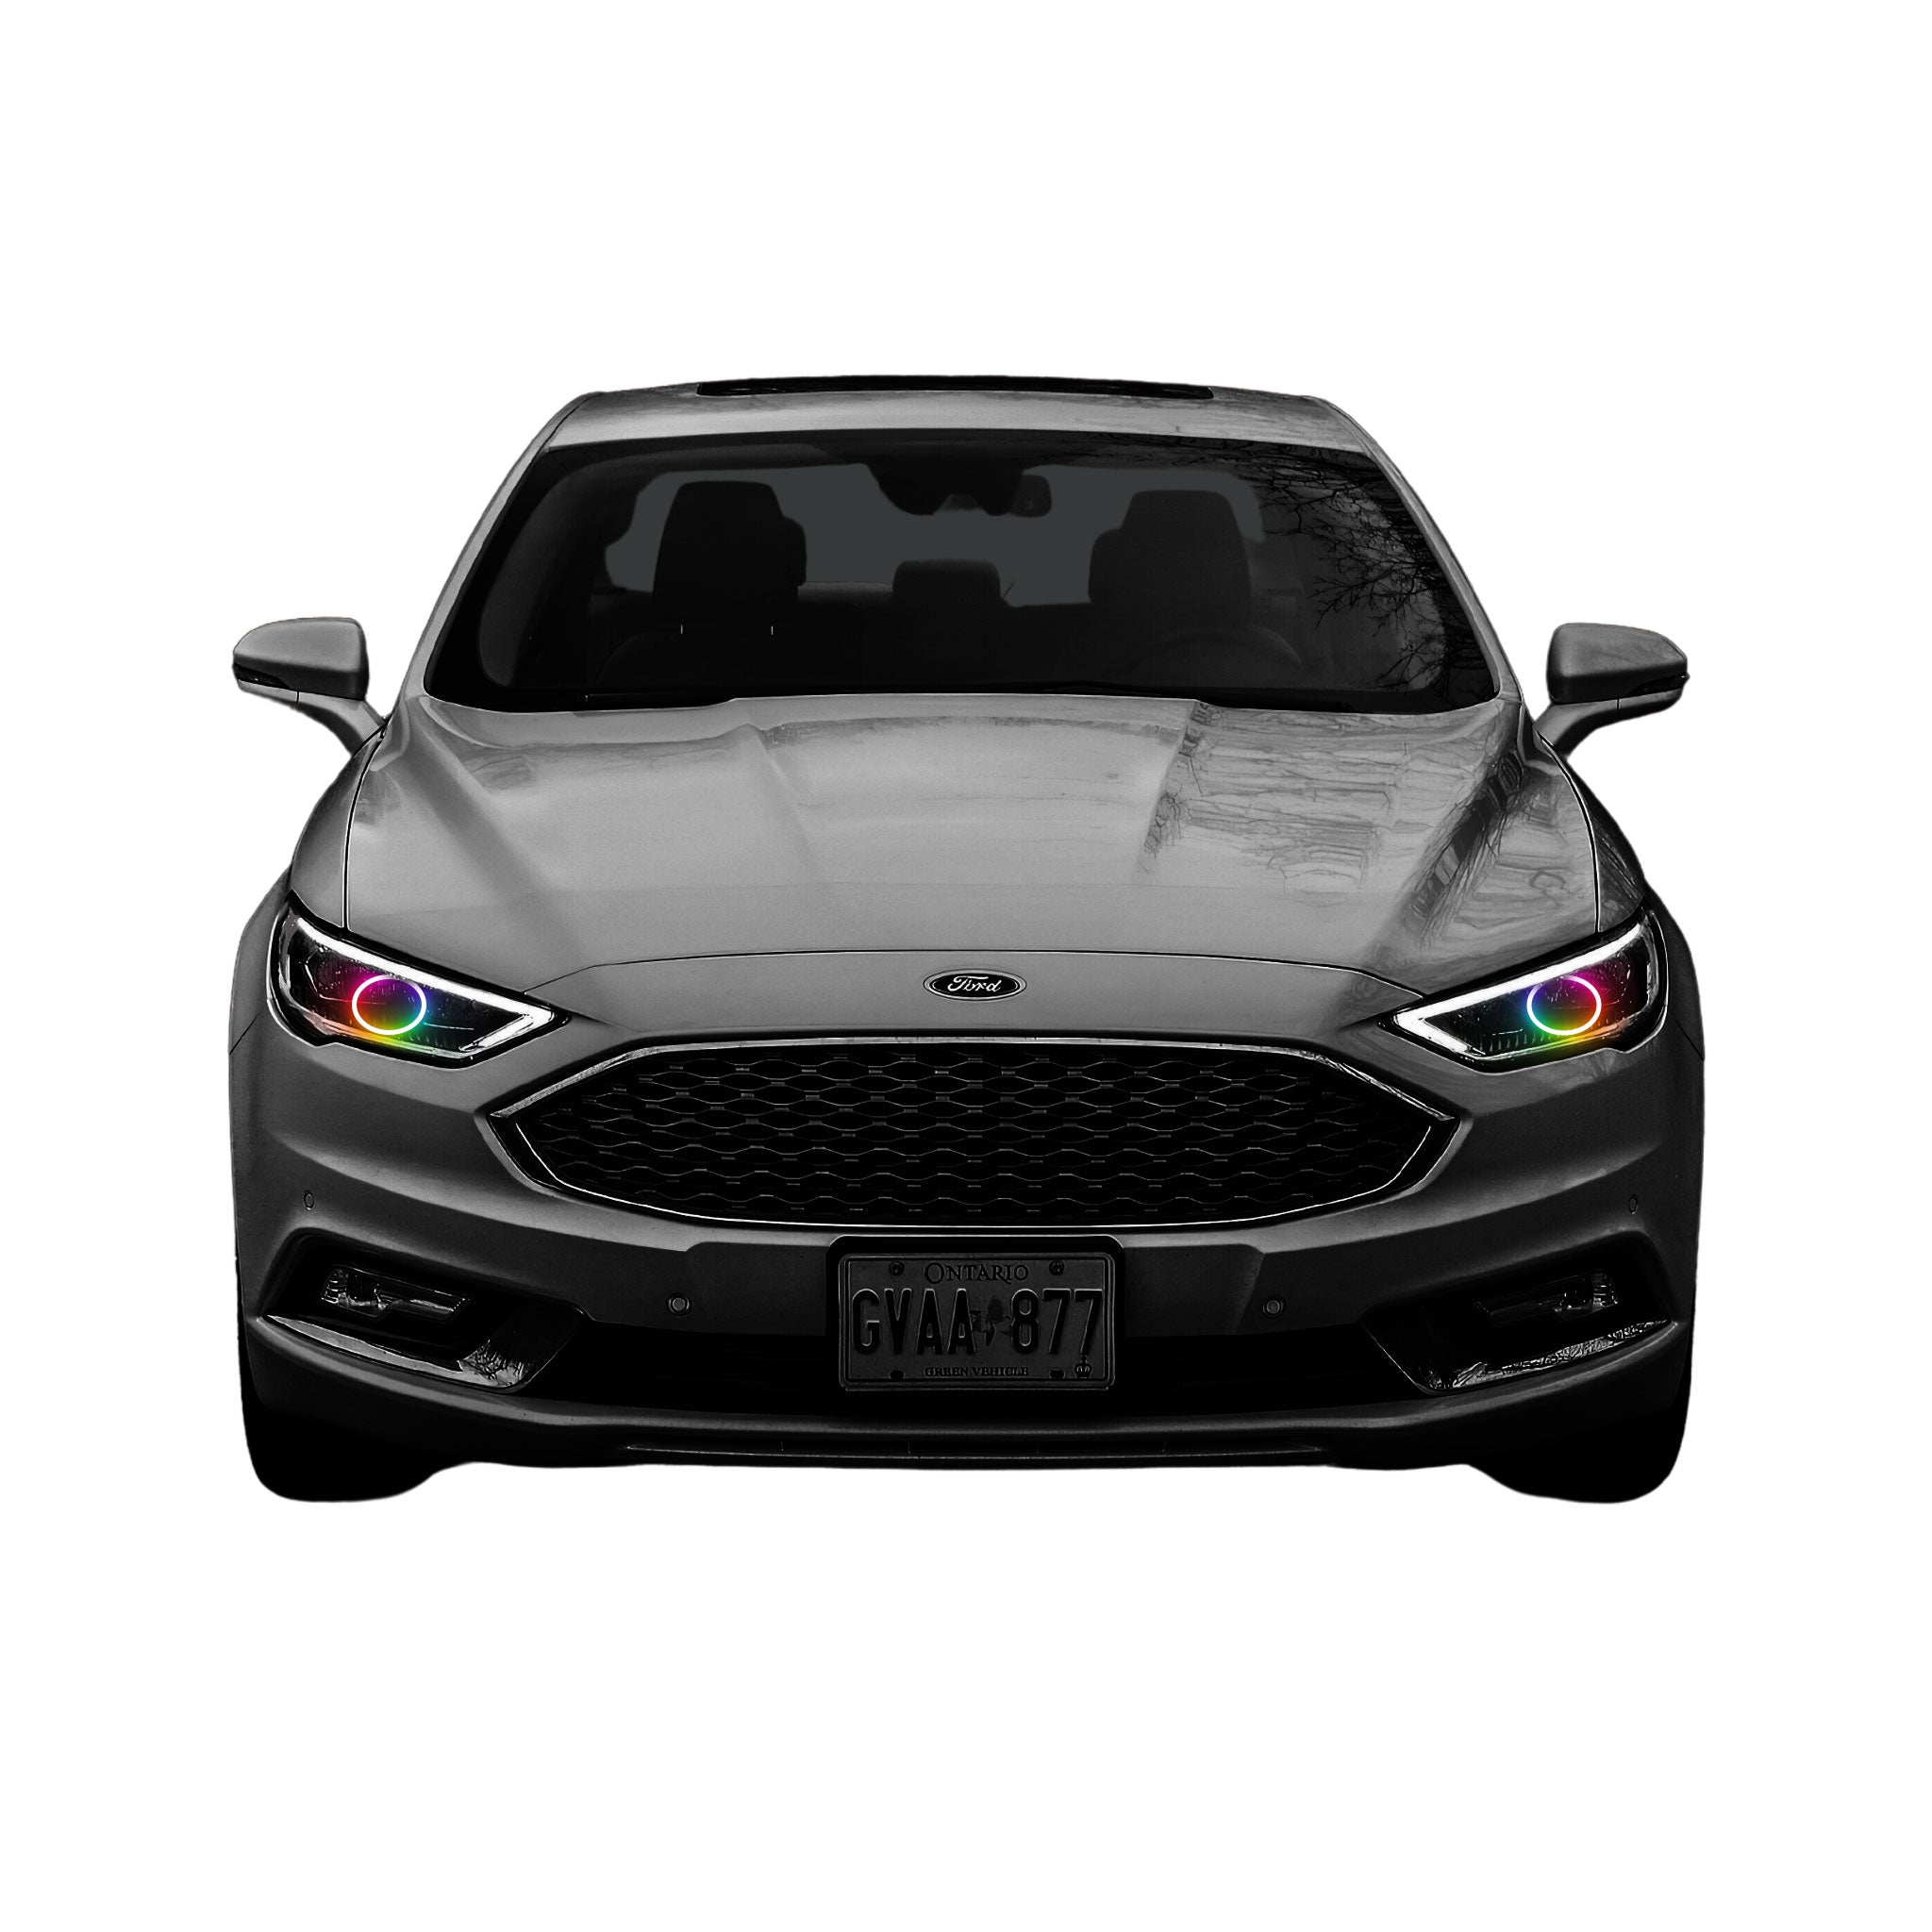 2012-2017 Ford Fusion Multicolor Halo Kit - RGB Halo Kits Multicolor Flow Series Color Chasing RGBWA LED headlight kit Oracle Lighting Trendz OneUpLighting Morimoto theretrofitsource AutoLEDTech Diode Dynamics